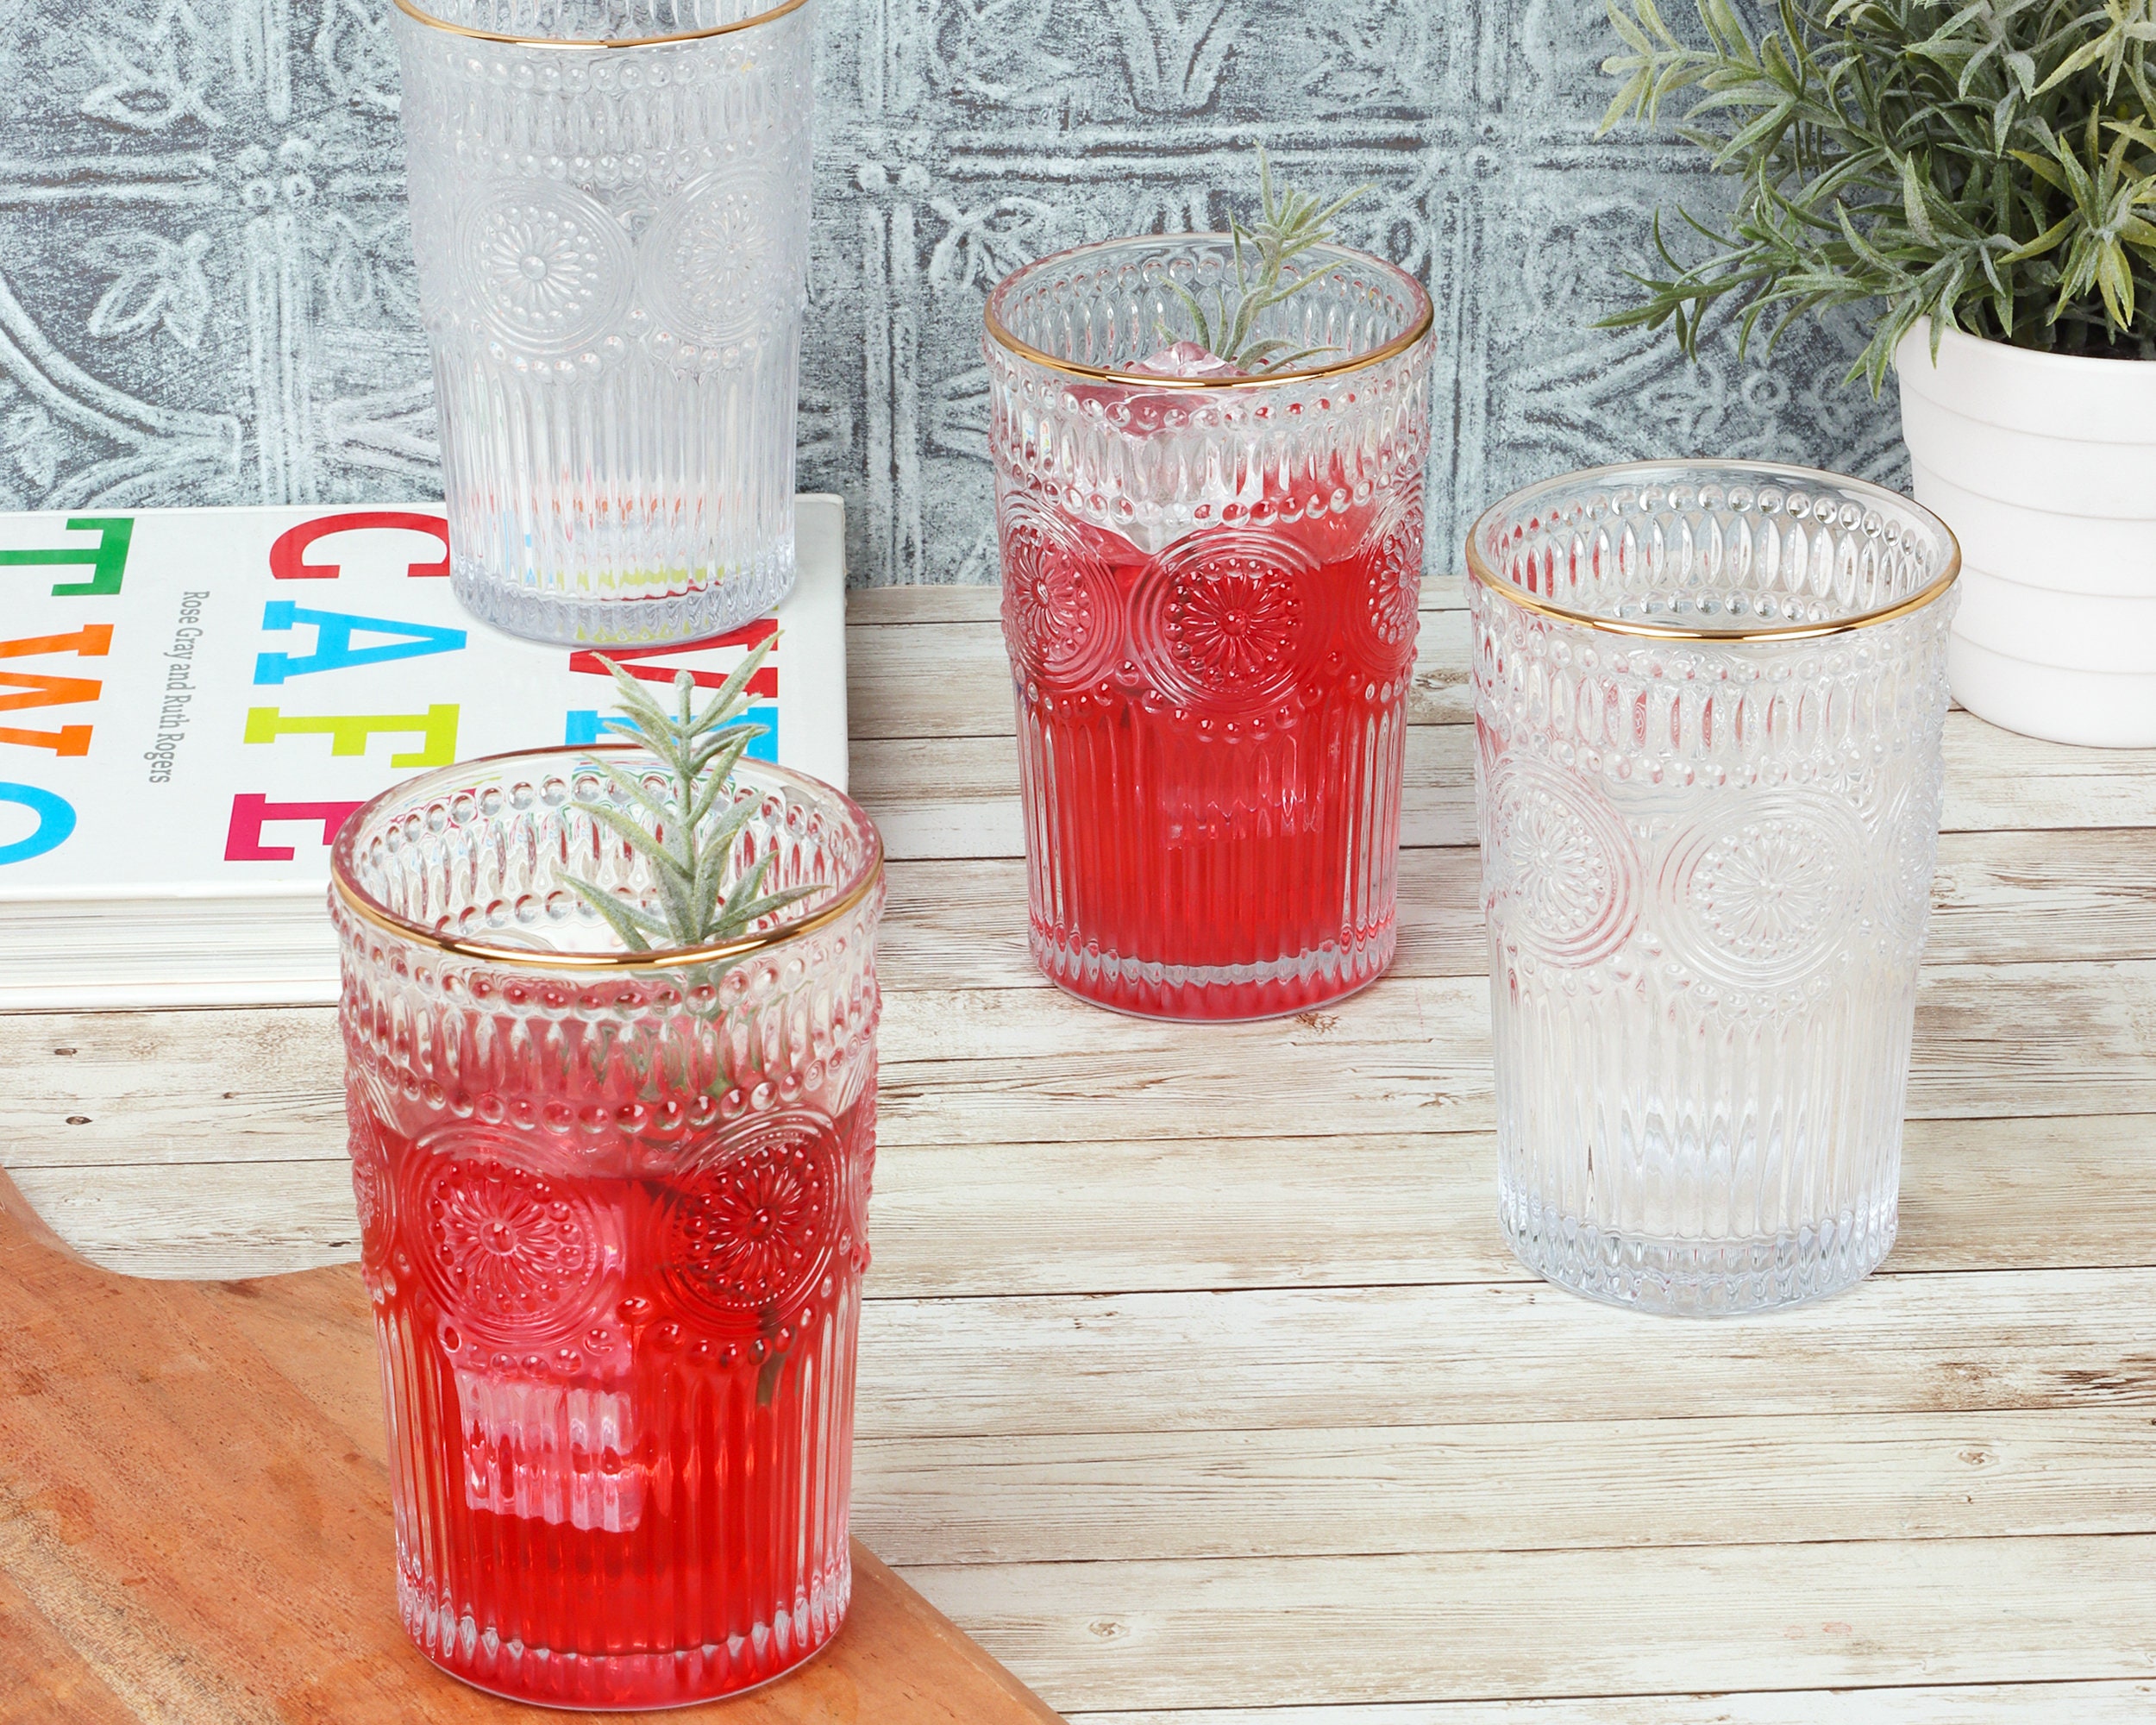 Medallion Highball Glass Set of 6, 16 oz, Durable Glasses, Etched Patterns,  Textured Glass Cups, Tall Drinking Glasses Ideal for Water, Juice, Beer